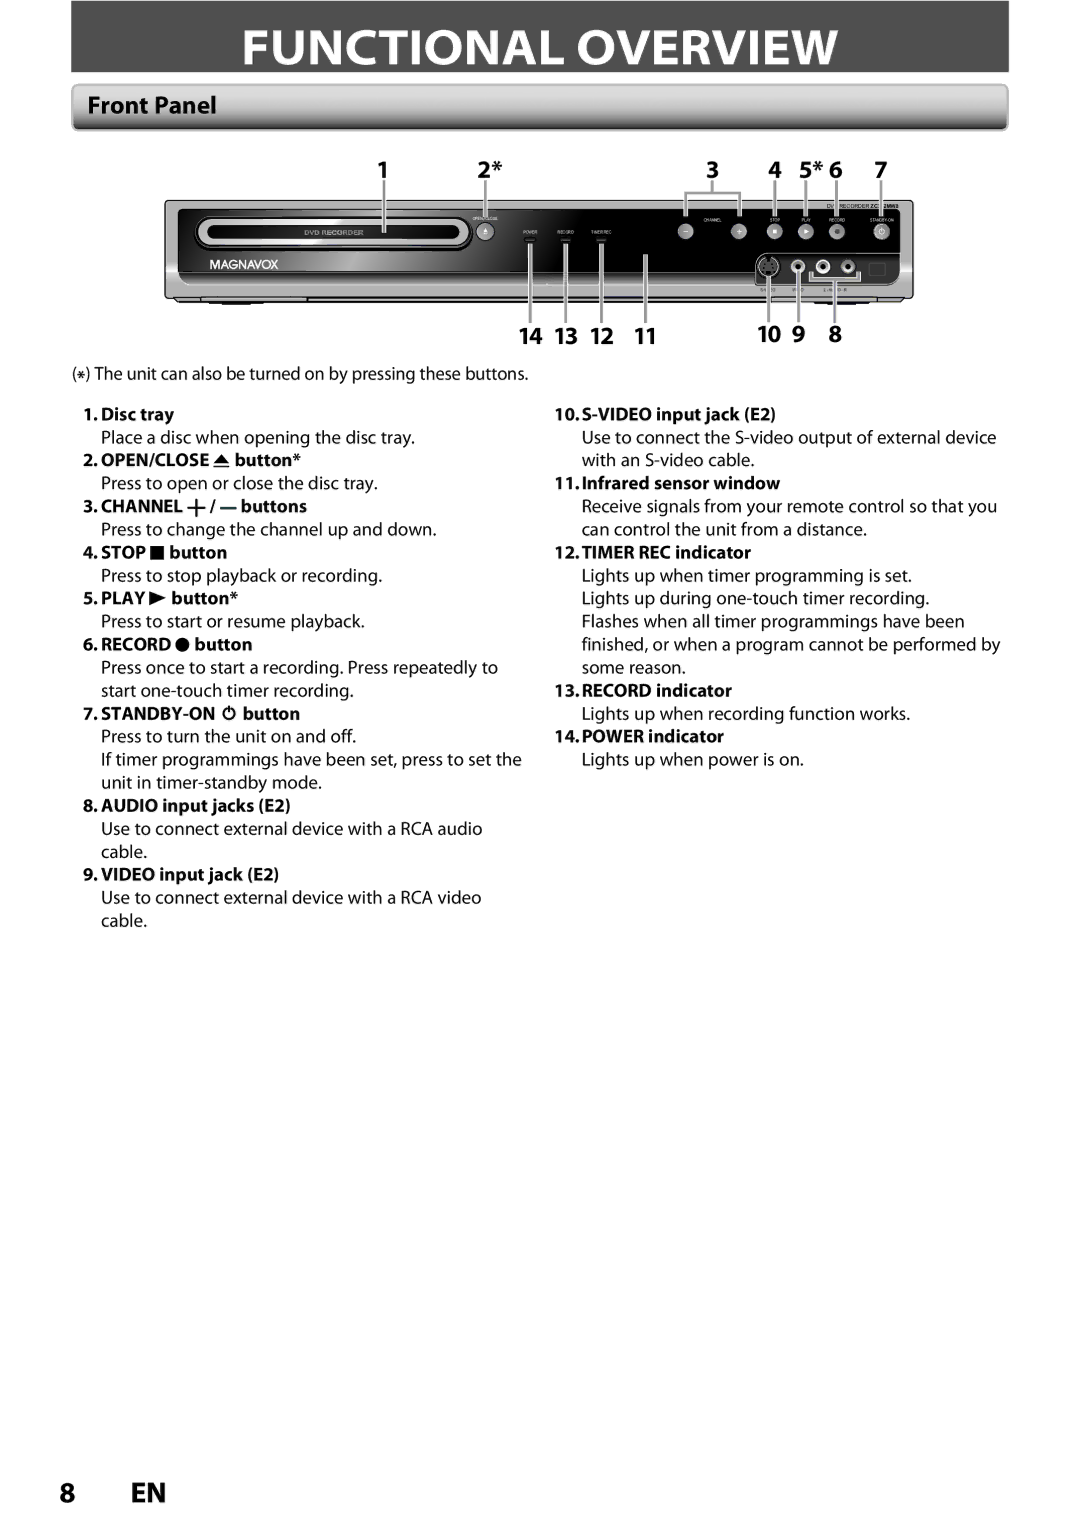 Magnavox ZC352MW8 owner manual Functional Overview, Front Panel, 14 13 